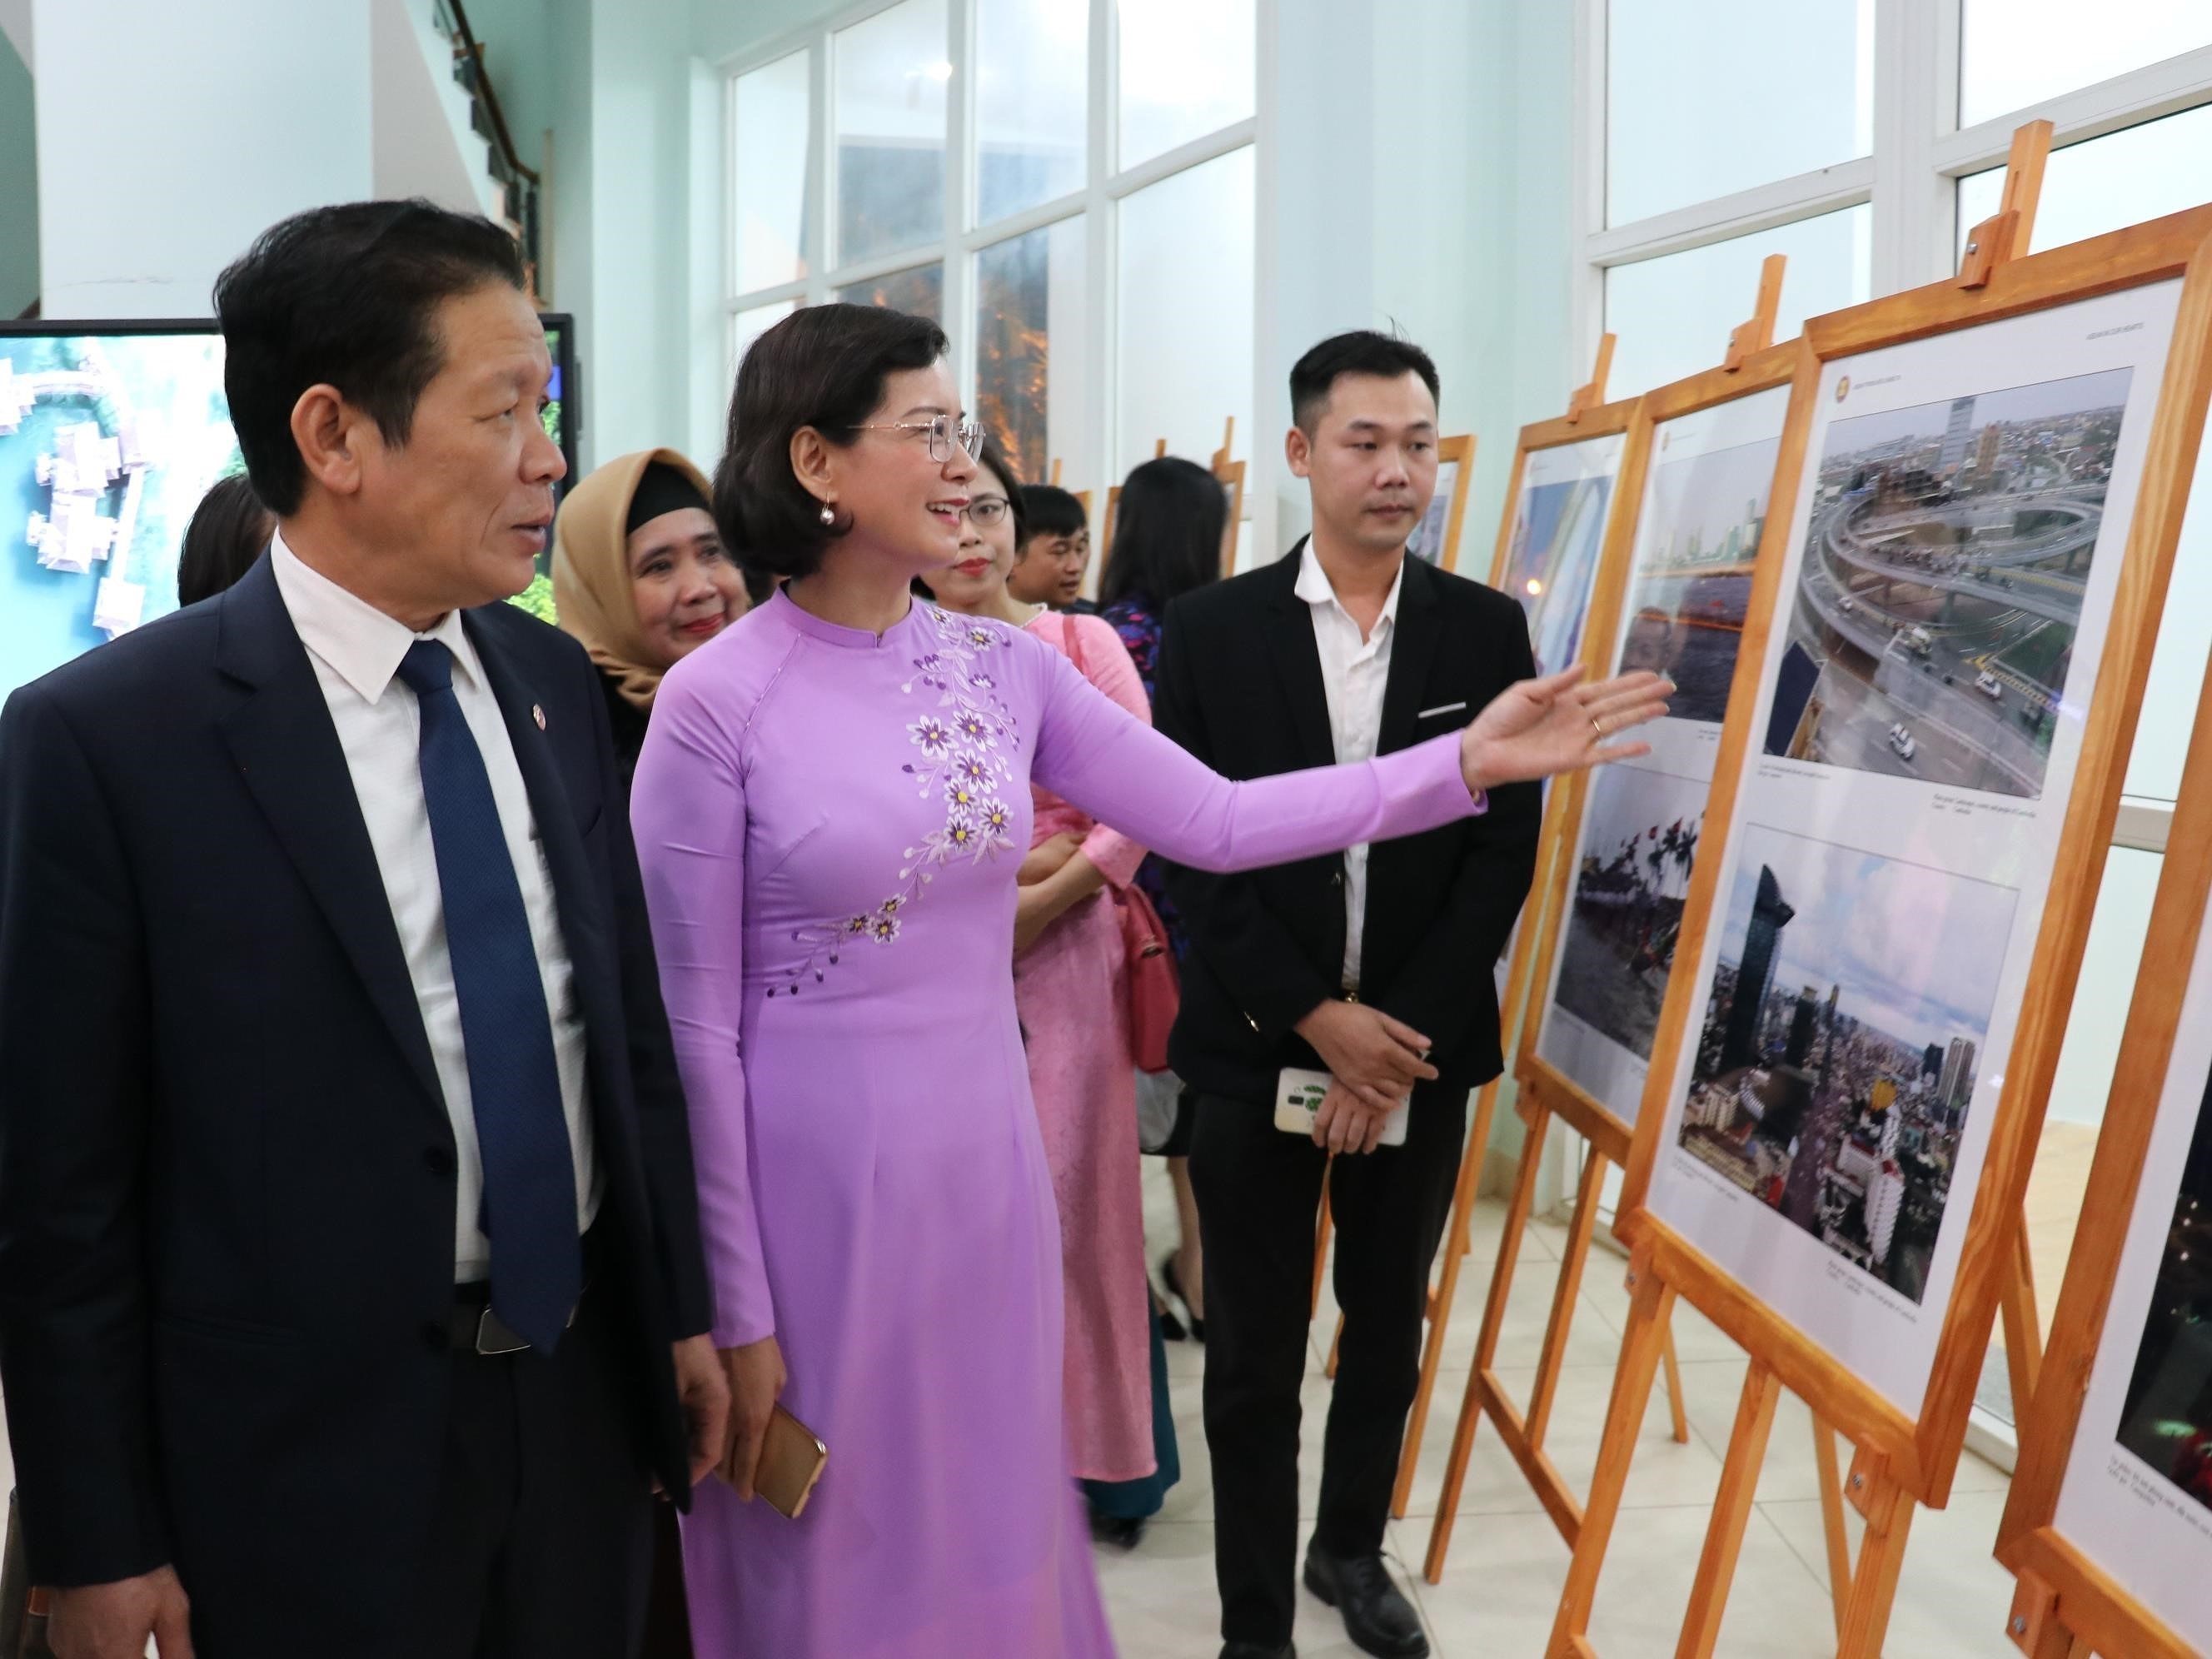 Exhibition showcases photos and films of ASEAN Community hinh anh 3